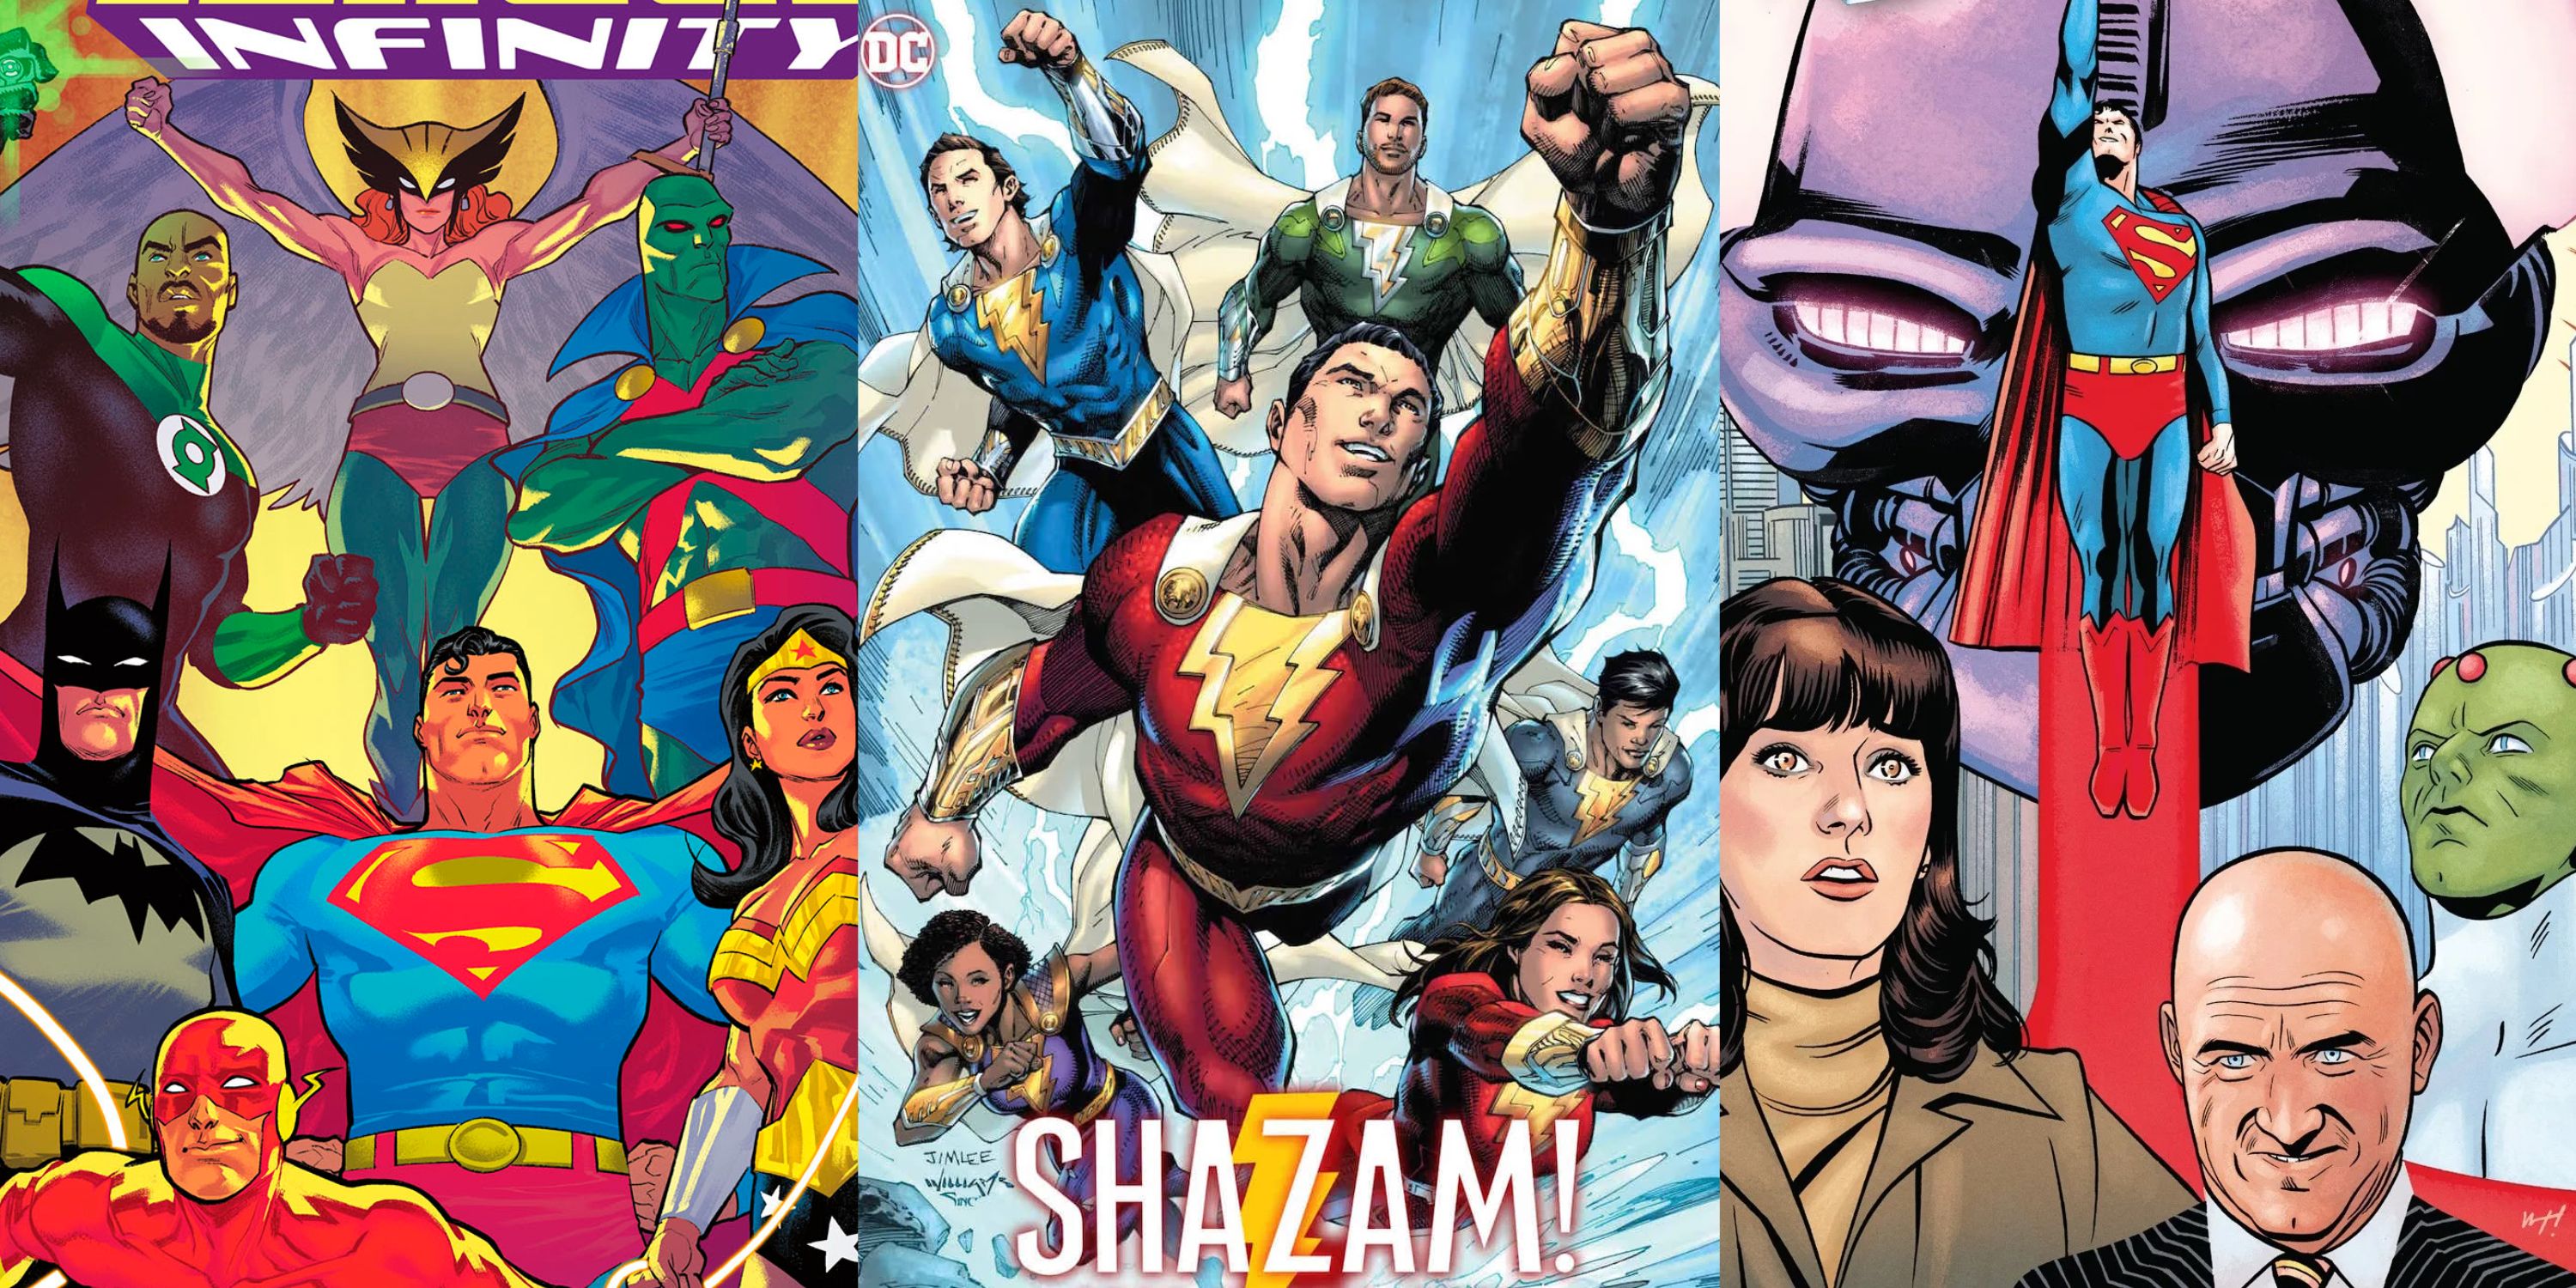 Split image Justice League Infinity, Shazam family in Fury of Gods tie-in comic, Superman 78 cover with Lois Lane, Lex Luthor and Brainiac